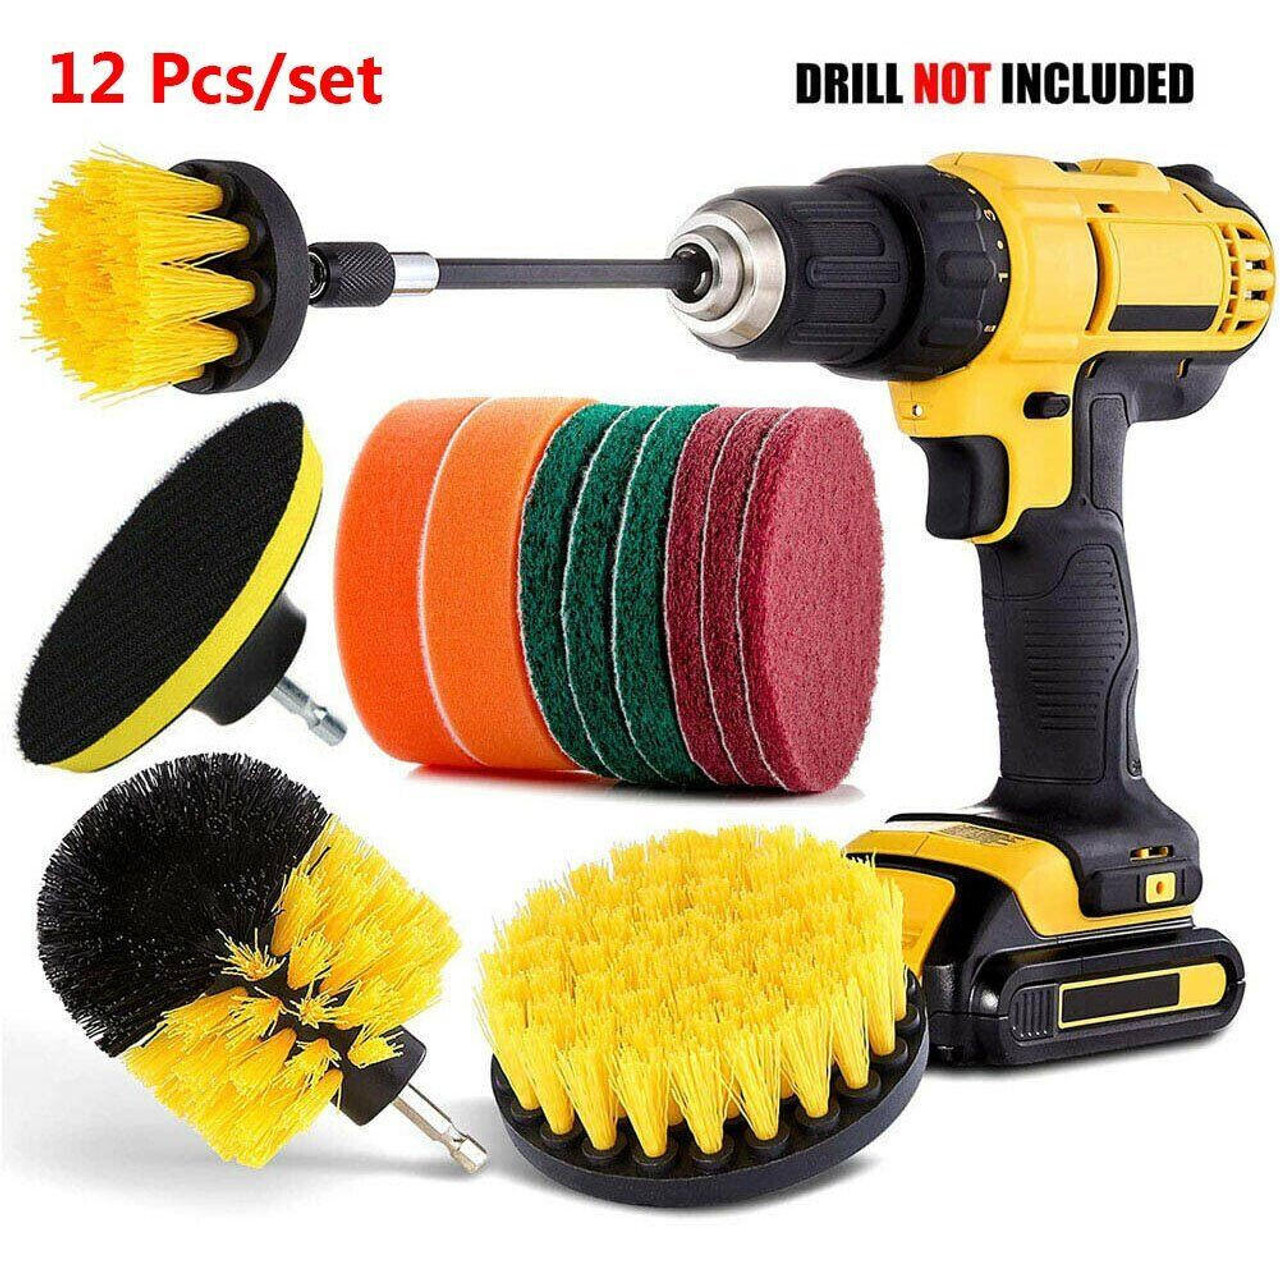 https://cdn11.bigcommerce.com/s-zrh8tkpr8d/images/stencil/1280x1280/products/10076/31557/1221-pcs-electric-drill-brush-attachment-set-cleaning-kit-power-scrubber-pads__92817.1675296151.jpg?c=2&imbypass=on